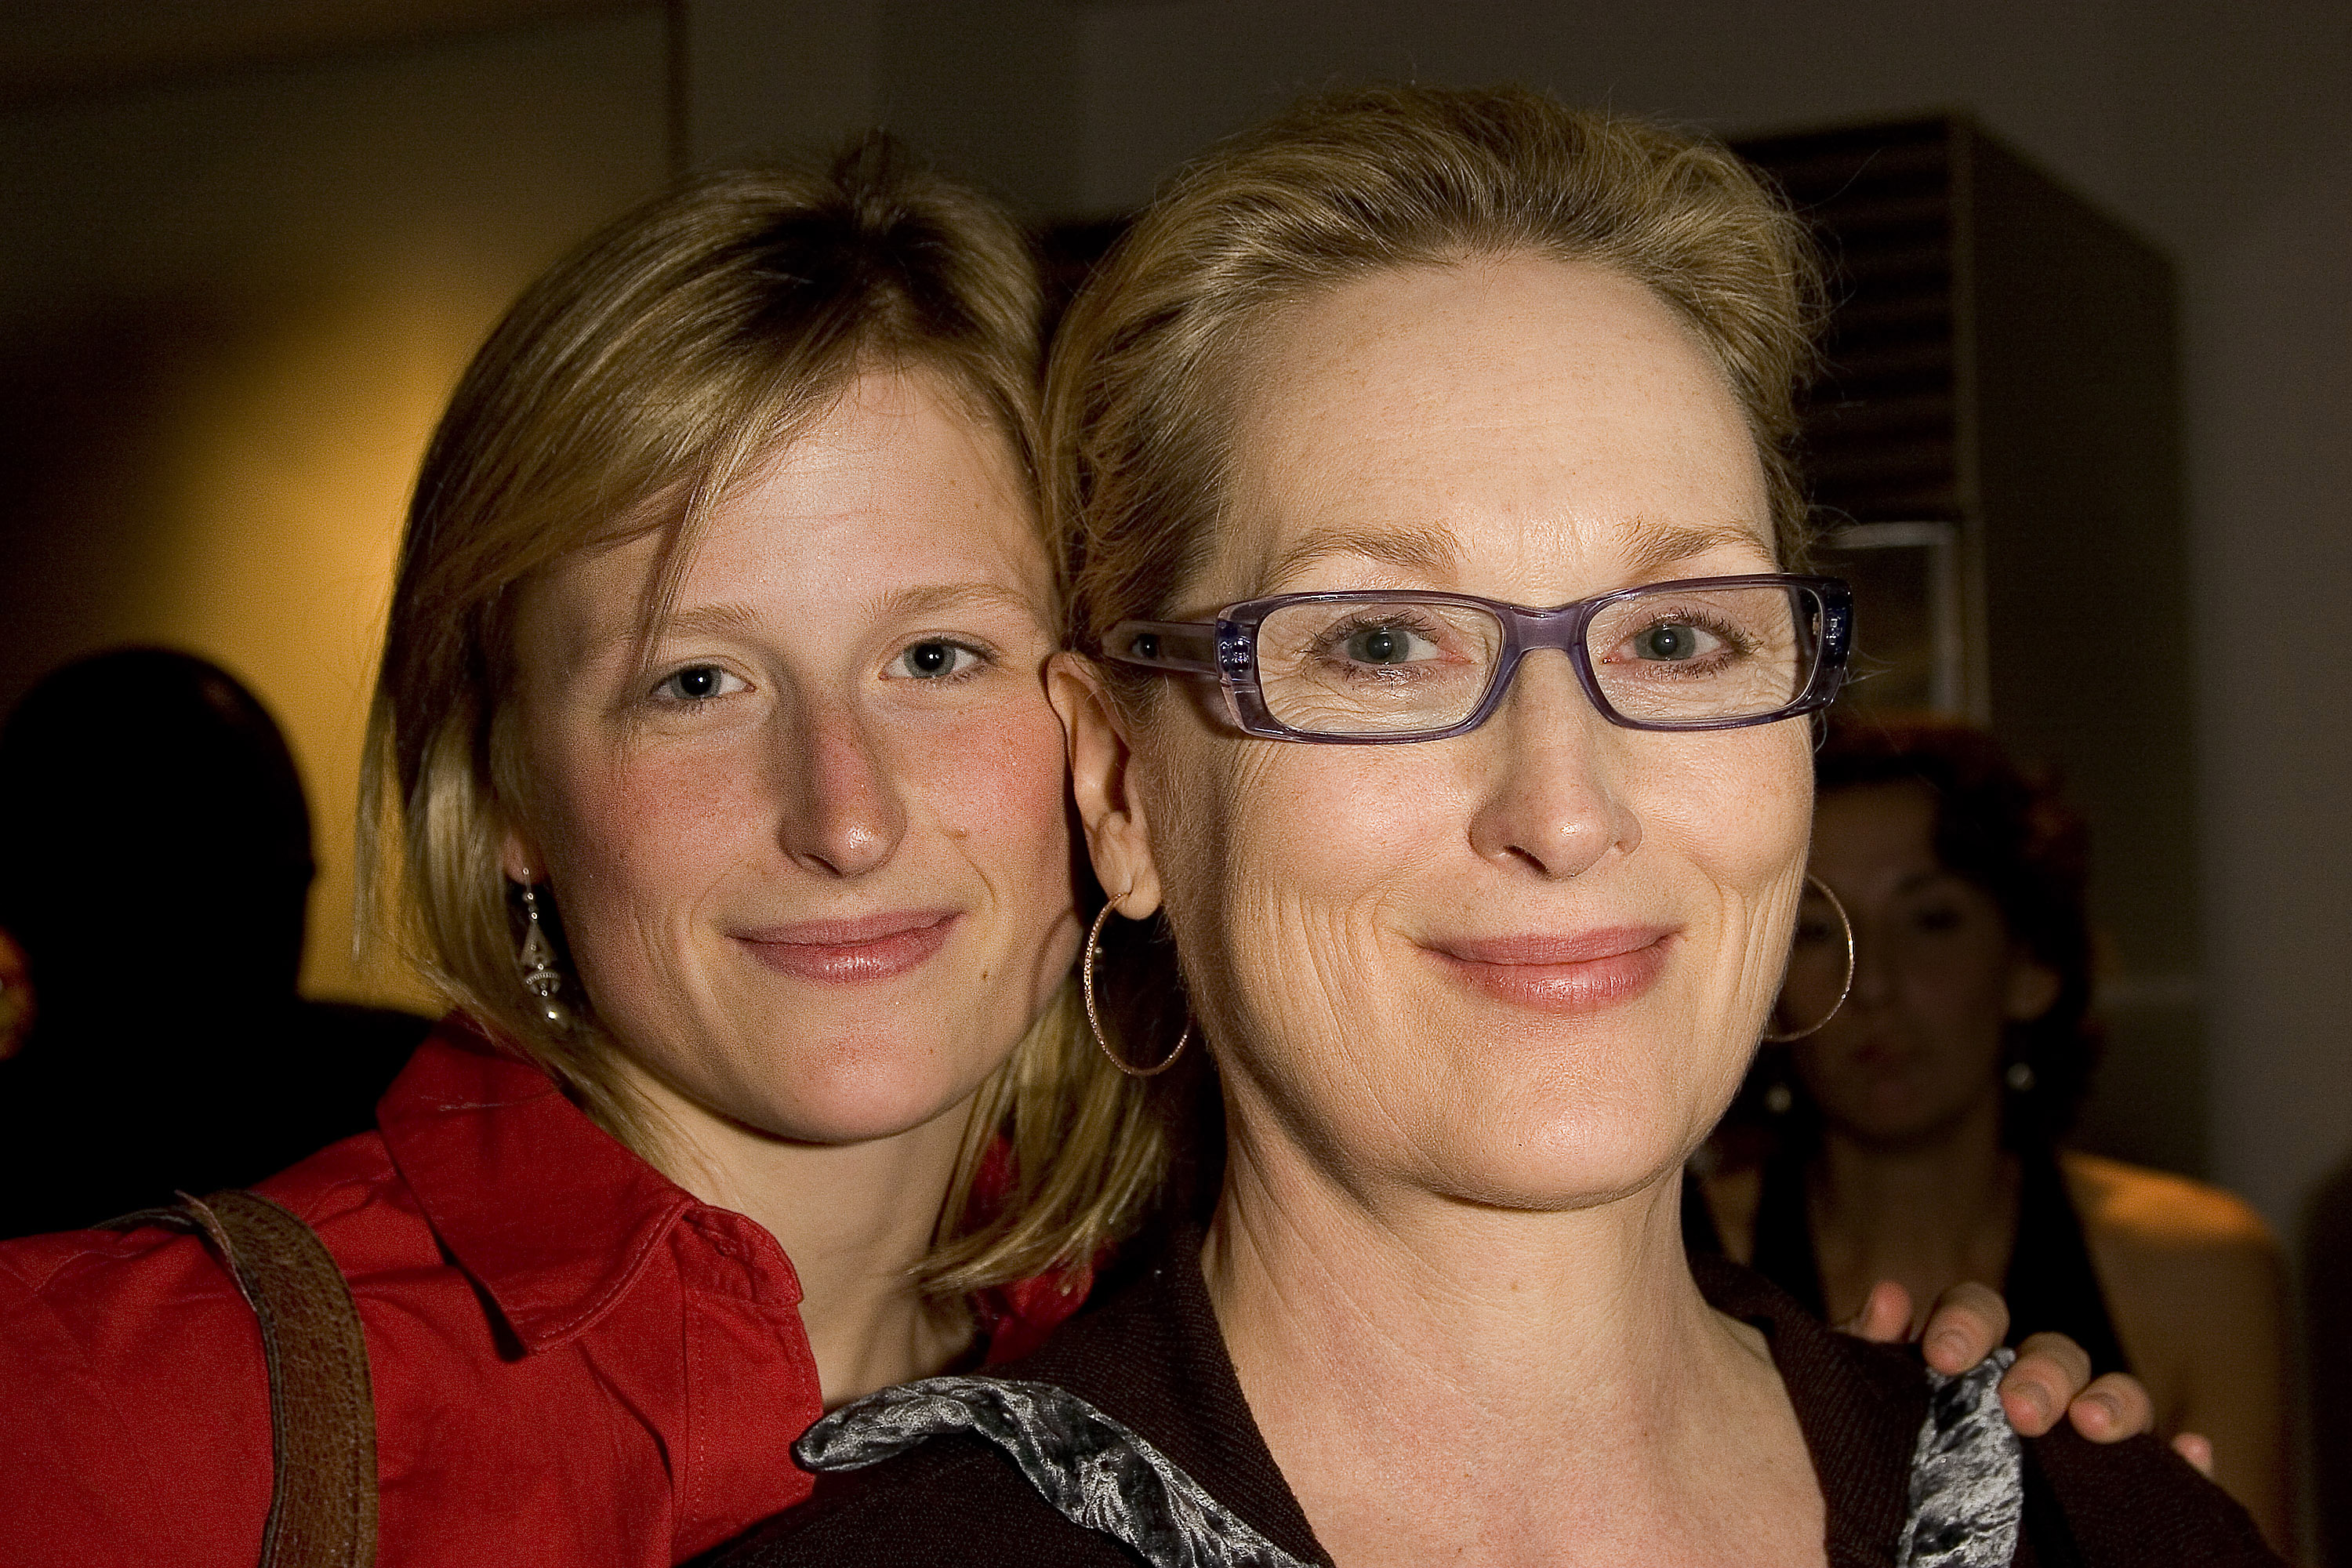 Mamie Gummer and Meryl Streep attend On The Road to Equality-An Evening of Jazz and Readings to Benefit Equality Now, on May 15, 2006. | Source: Getty Images